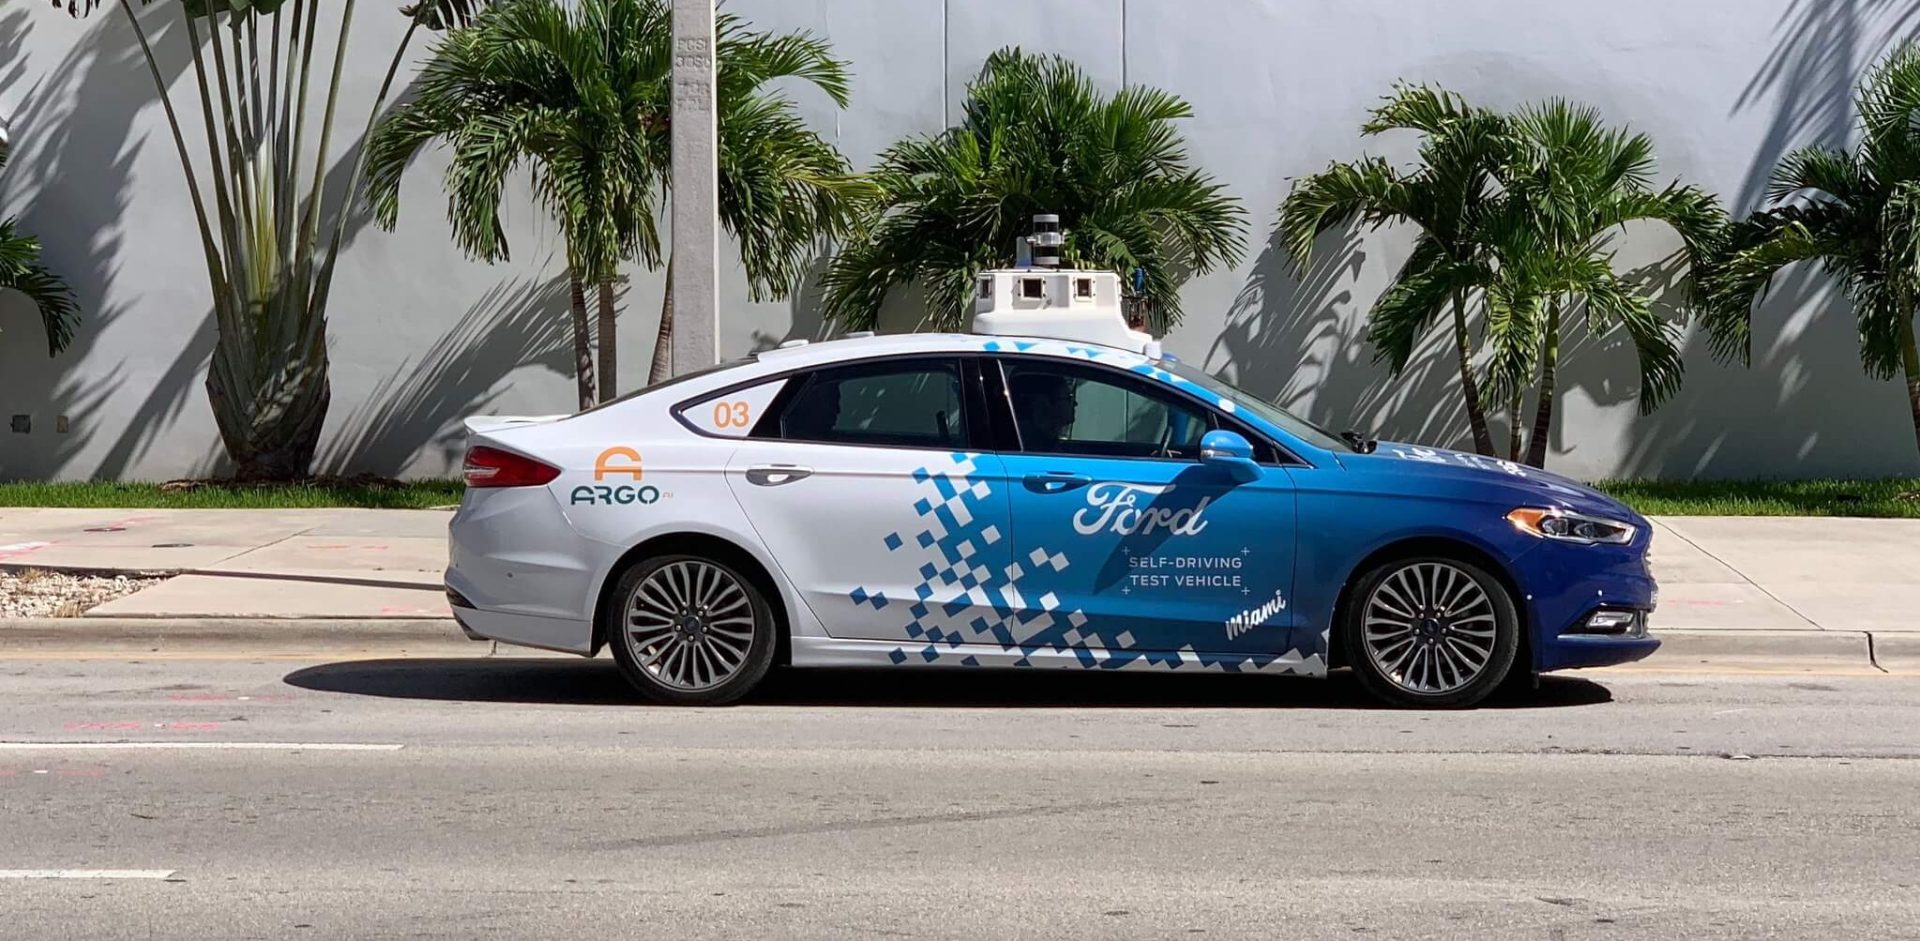 Ford Argo Self Driving Car I - Photo by Phillip Pessar on Flickr